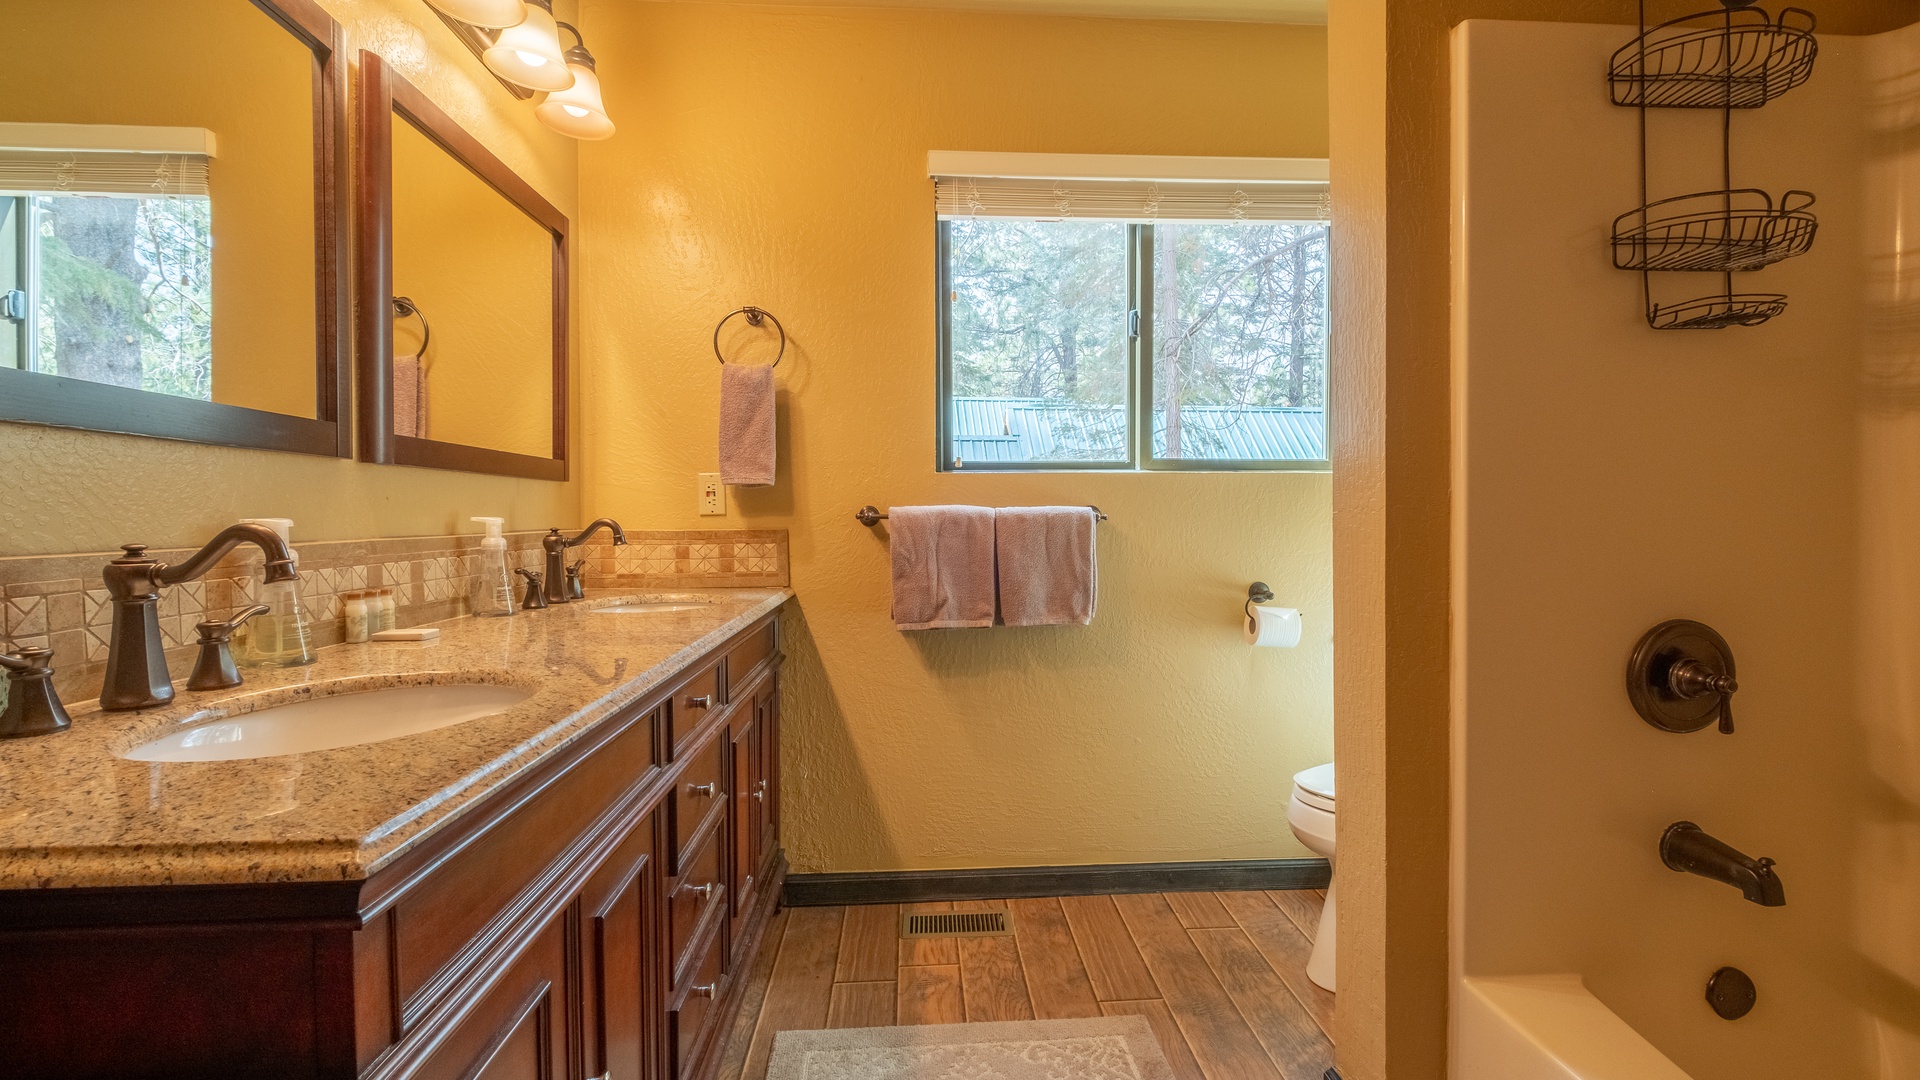 Shared Guest Bathroom: Tahoe Donner Vacation Lodge